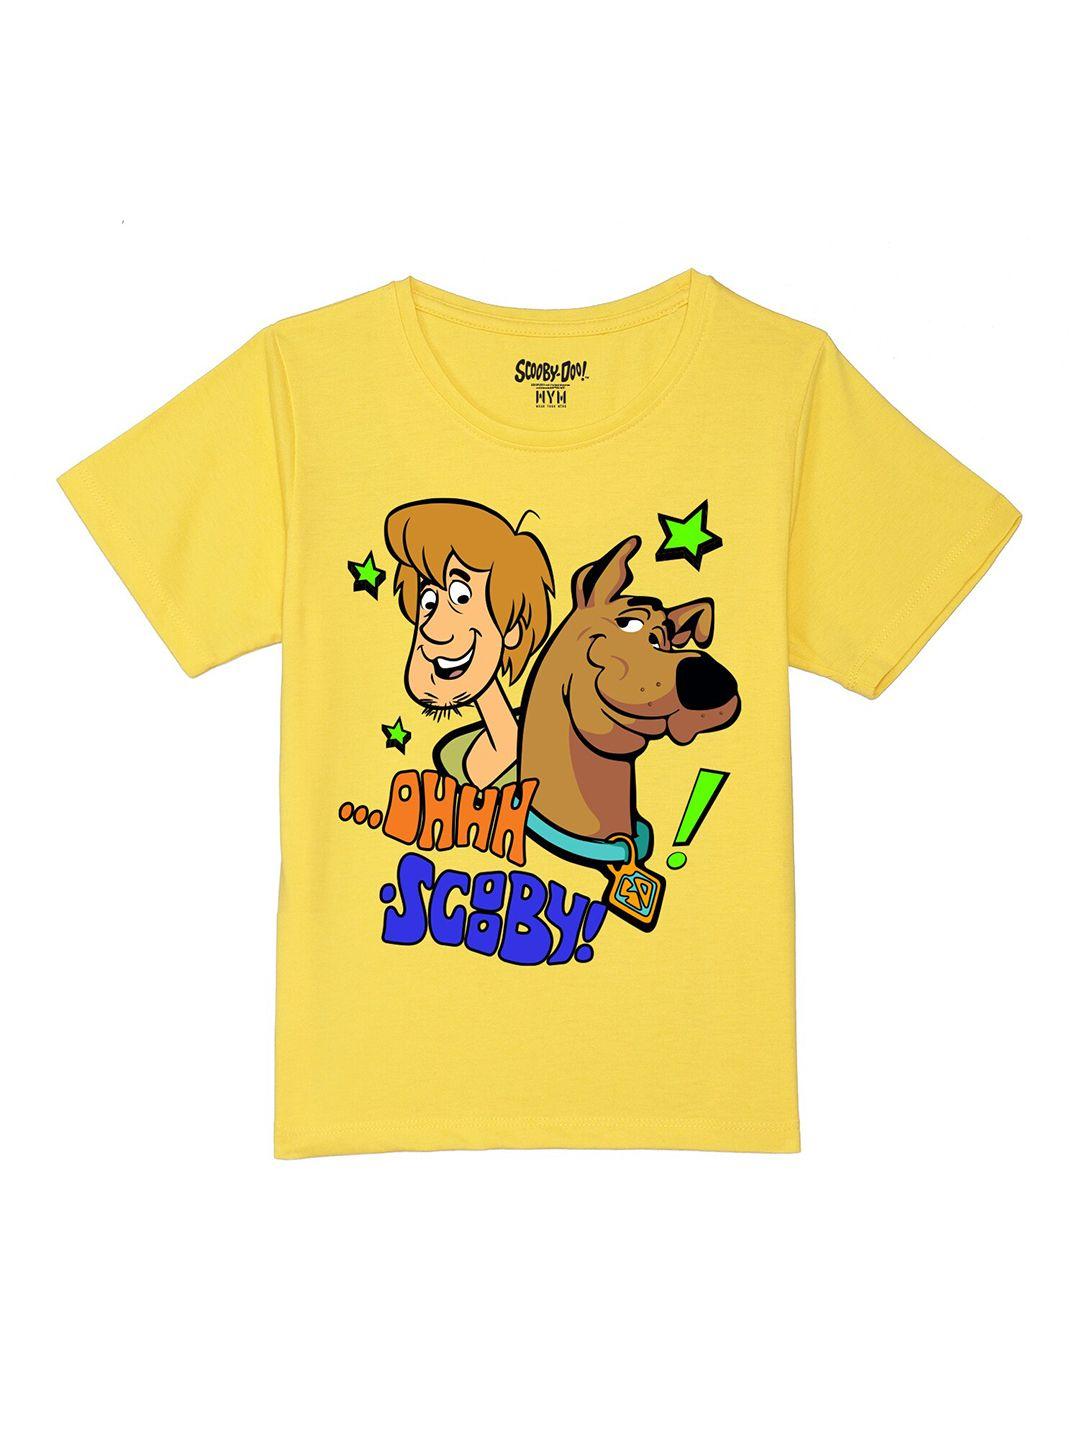 wear your mind boys scooby-doo printed pure cotton t-shirt